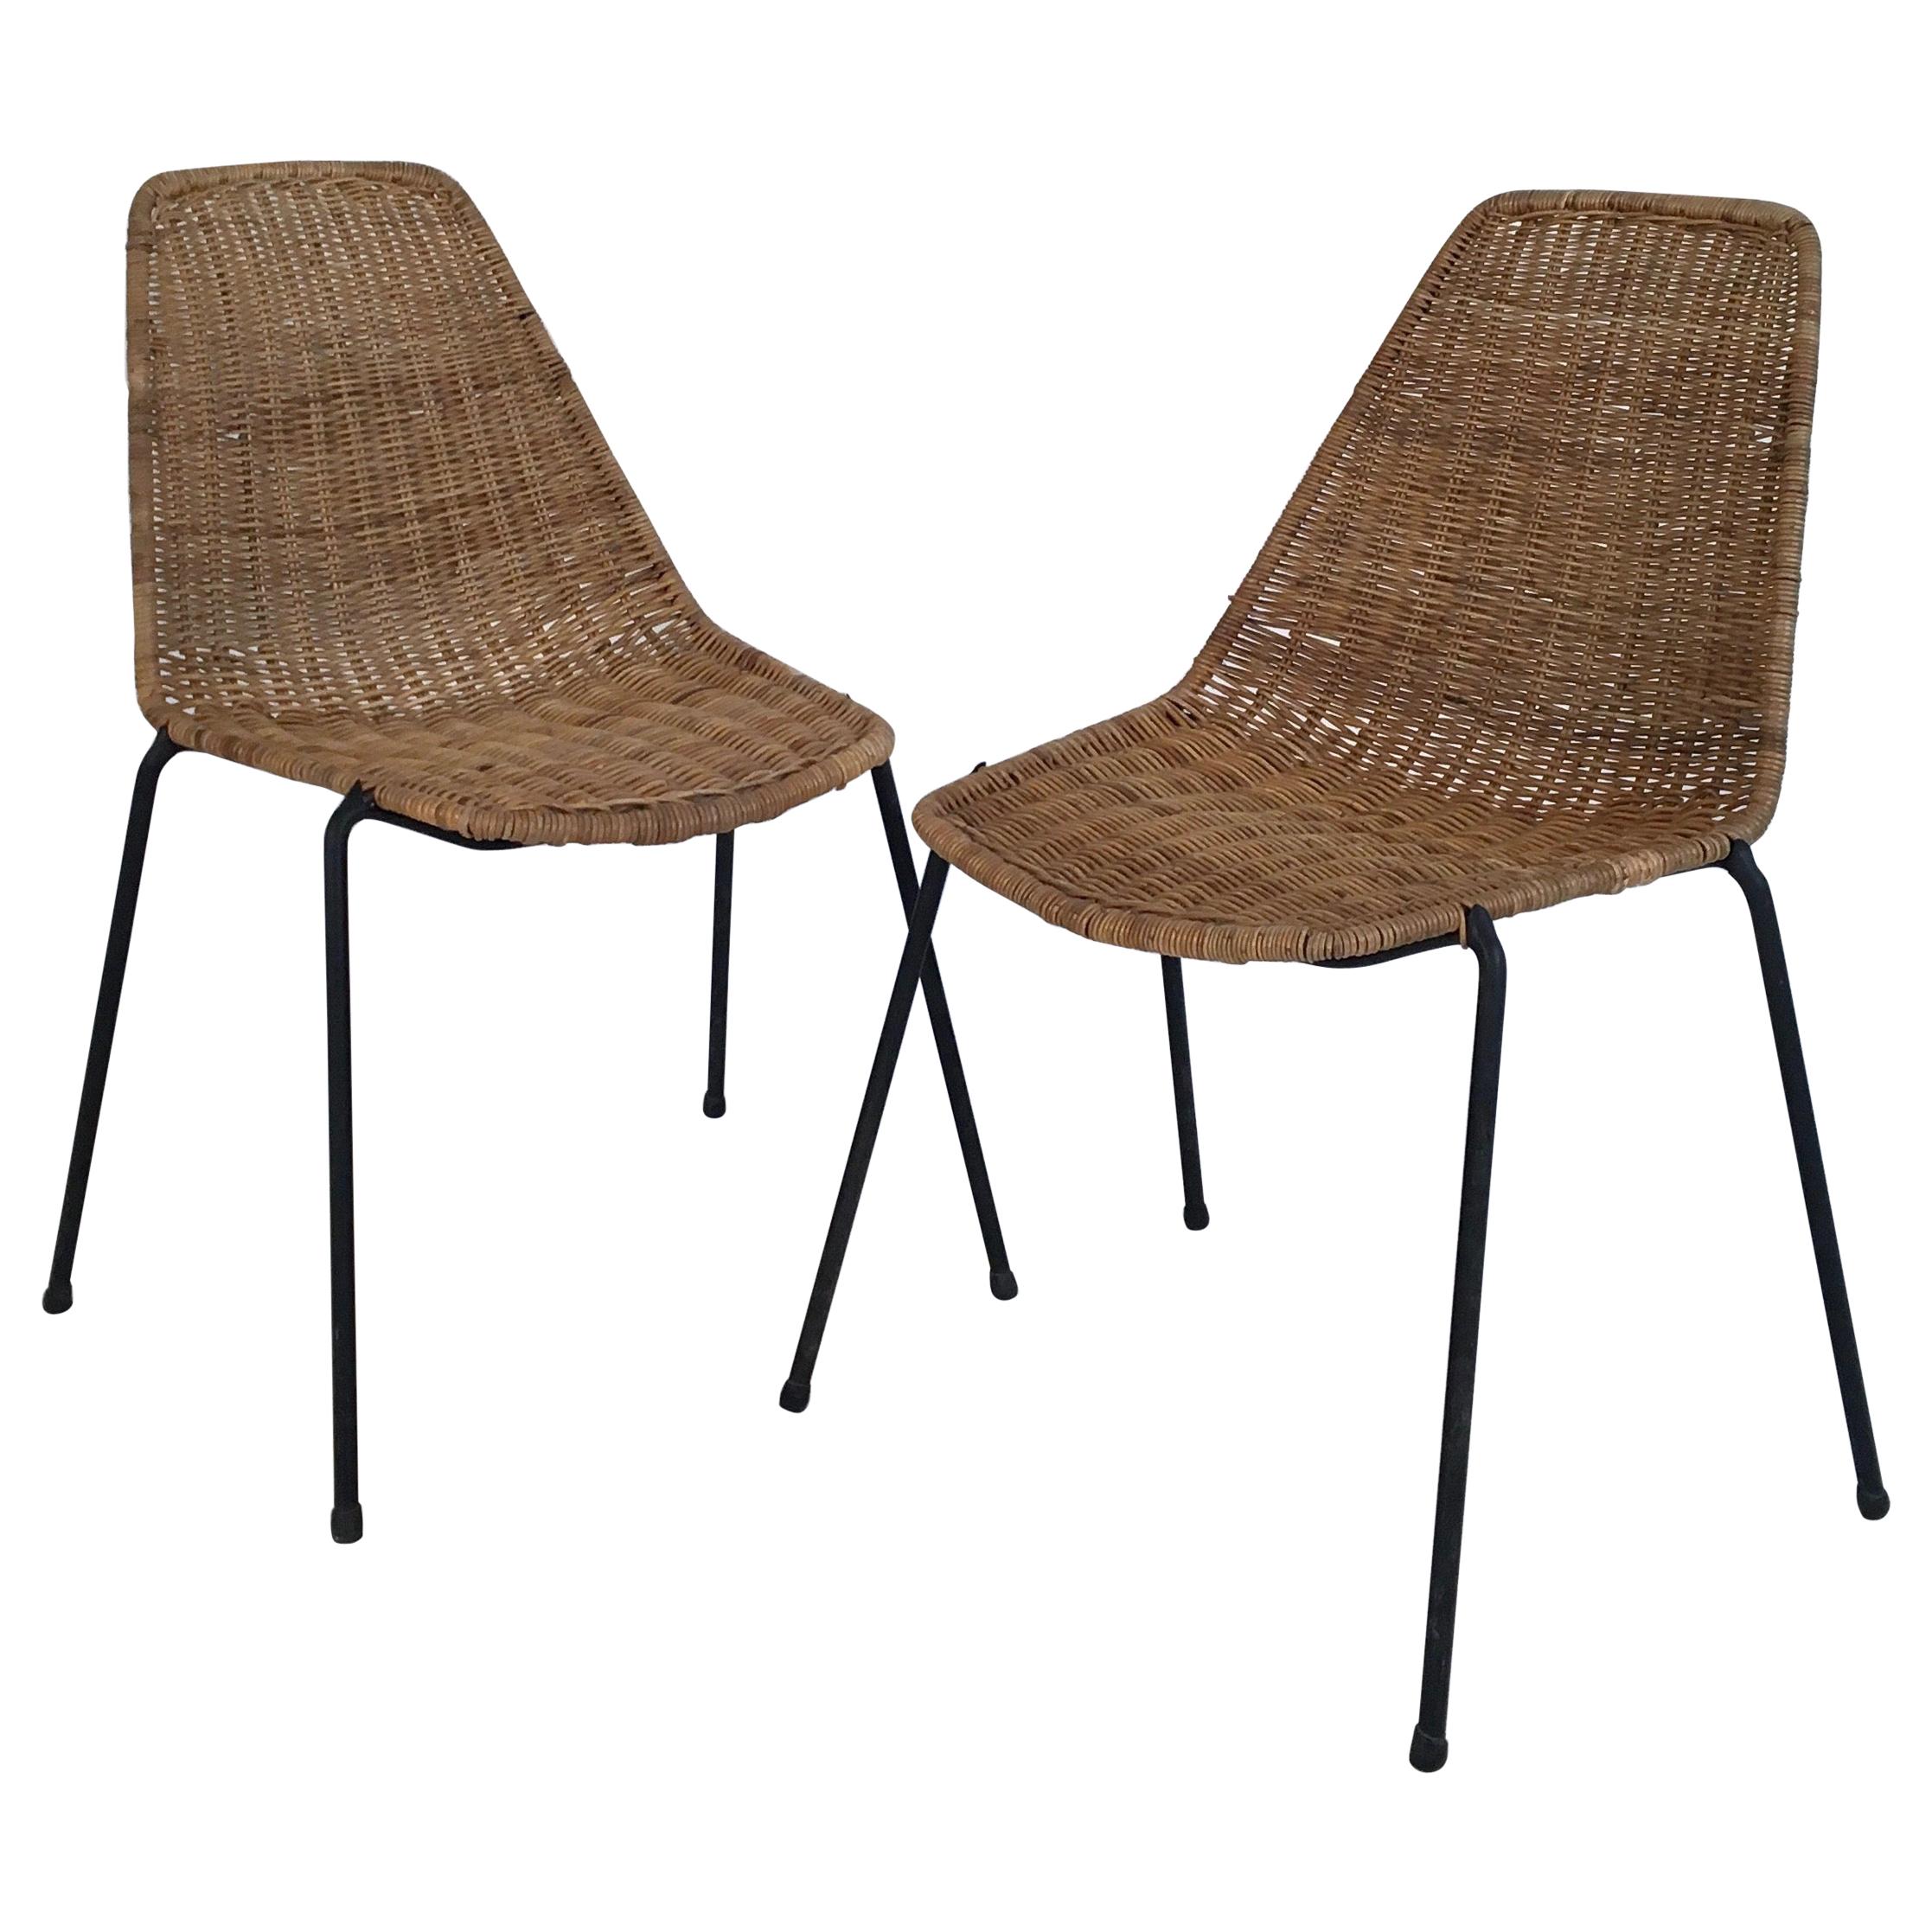 2 Midcentury Wicker Chairs by Campo & Graffi for Home Torino, Italy, circa 1950 For Sale